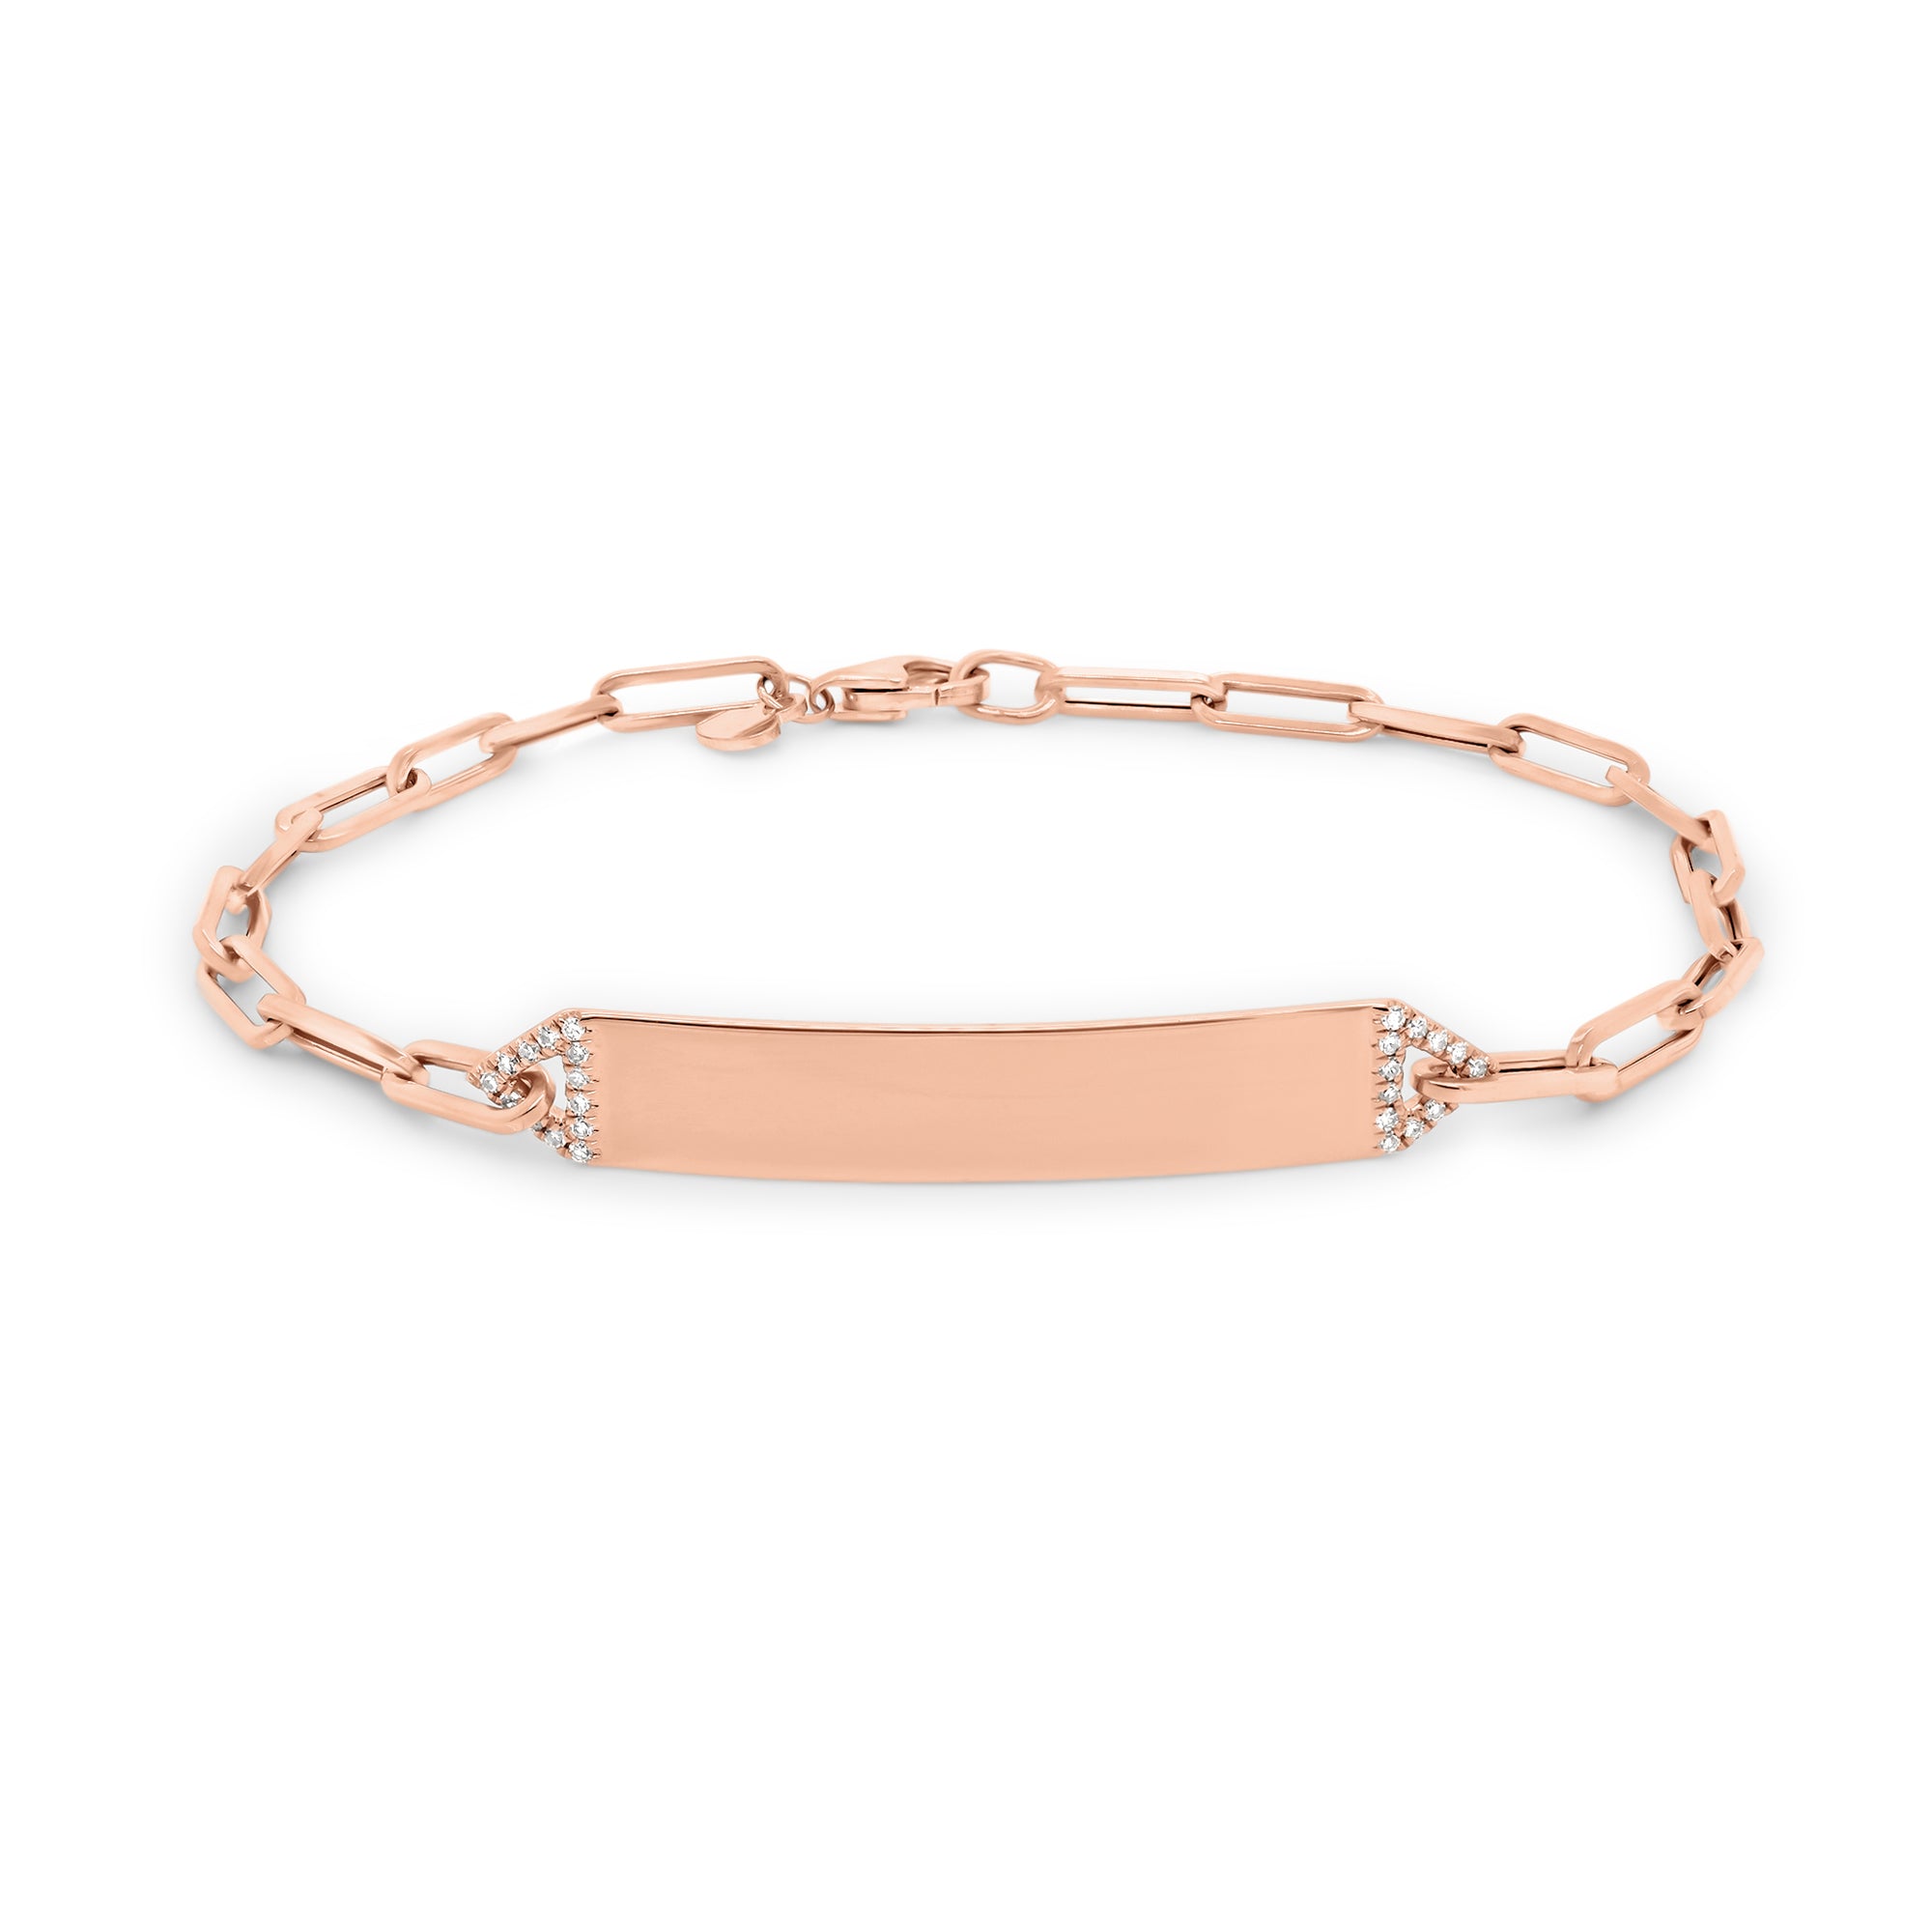 Diamond ID Bracelet with Paperclip Chain - 14K rose gold weighing 3.21 grams - 26 round diamonds totaling 0.07 carats